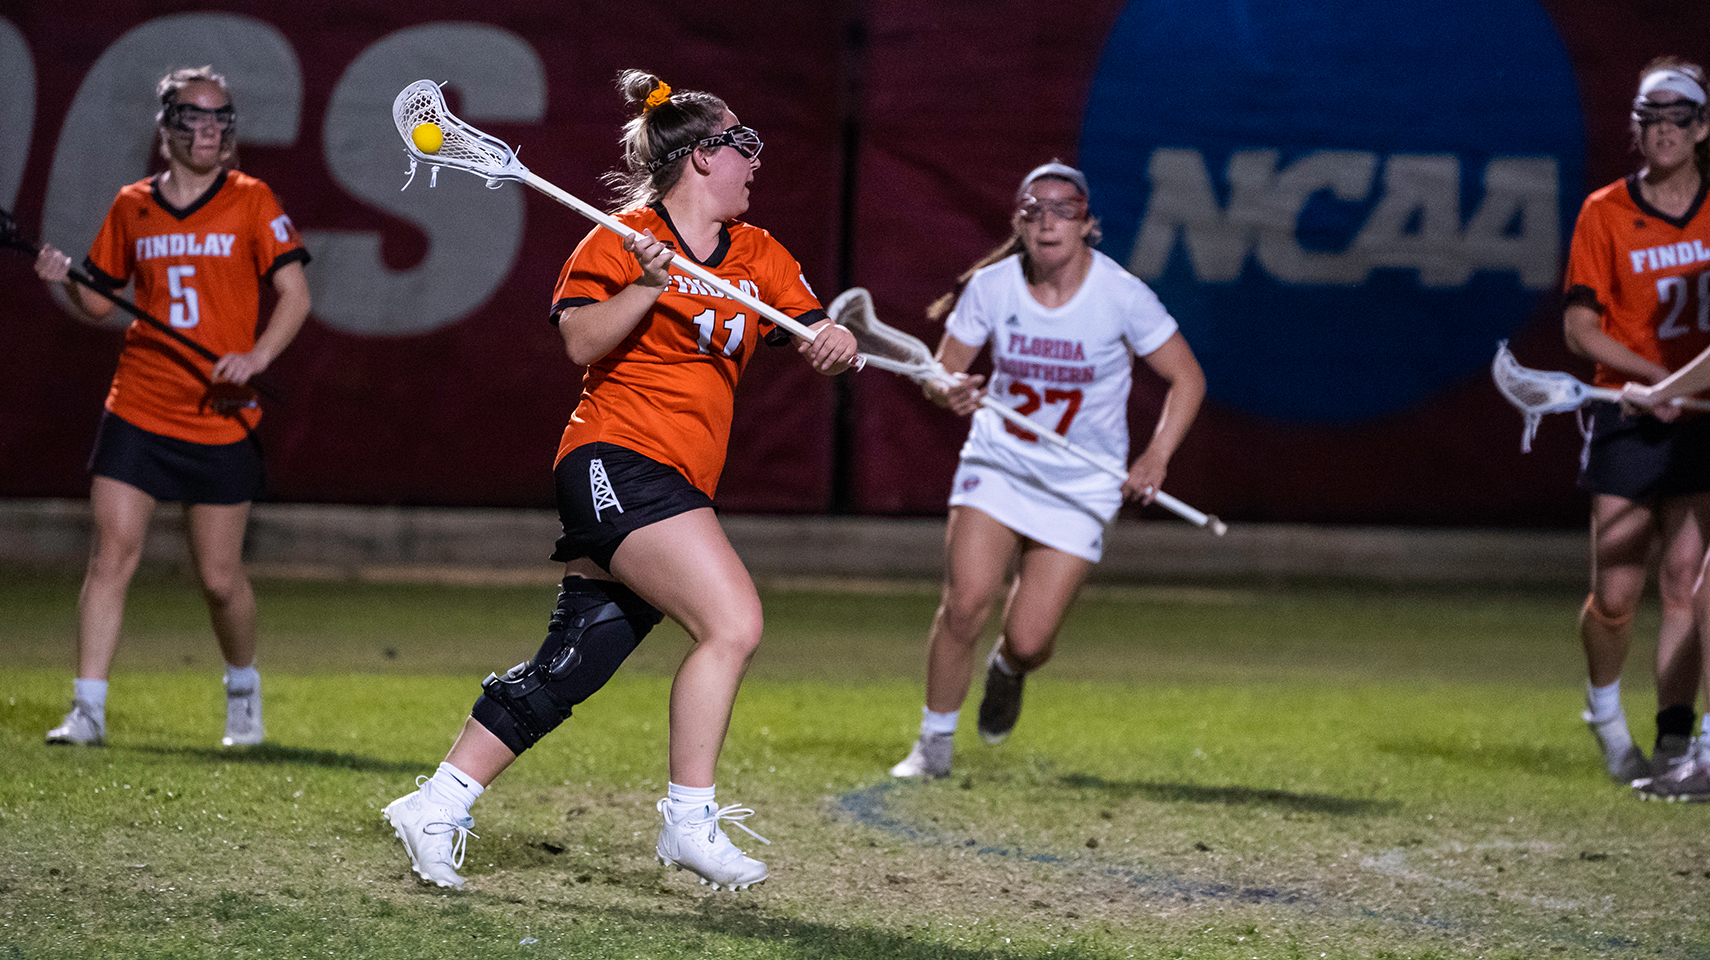 Women's lacrosse player running at night in Florida